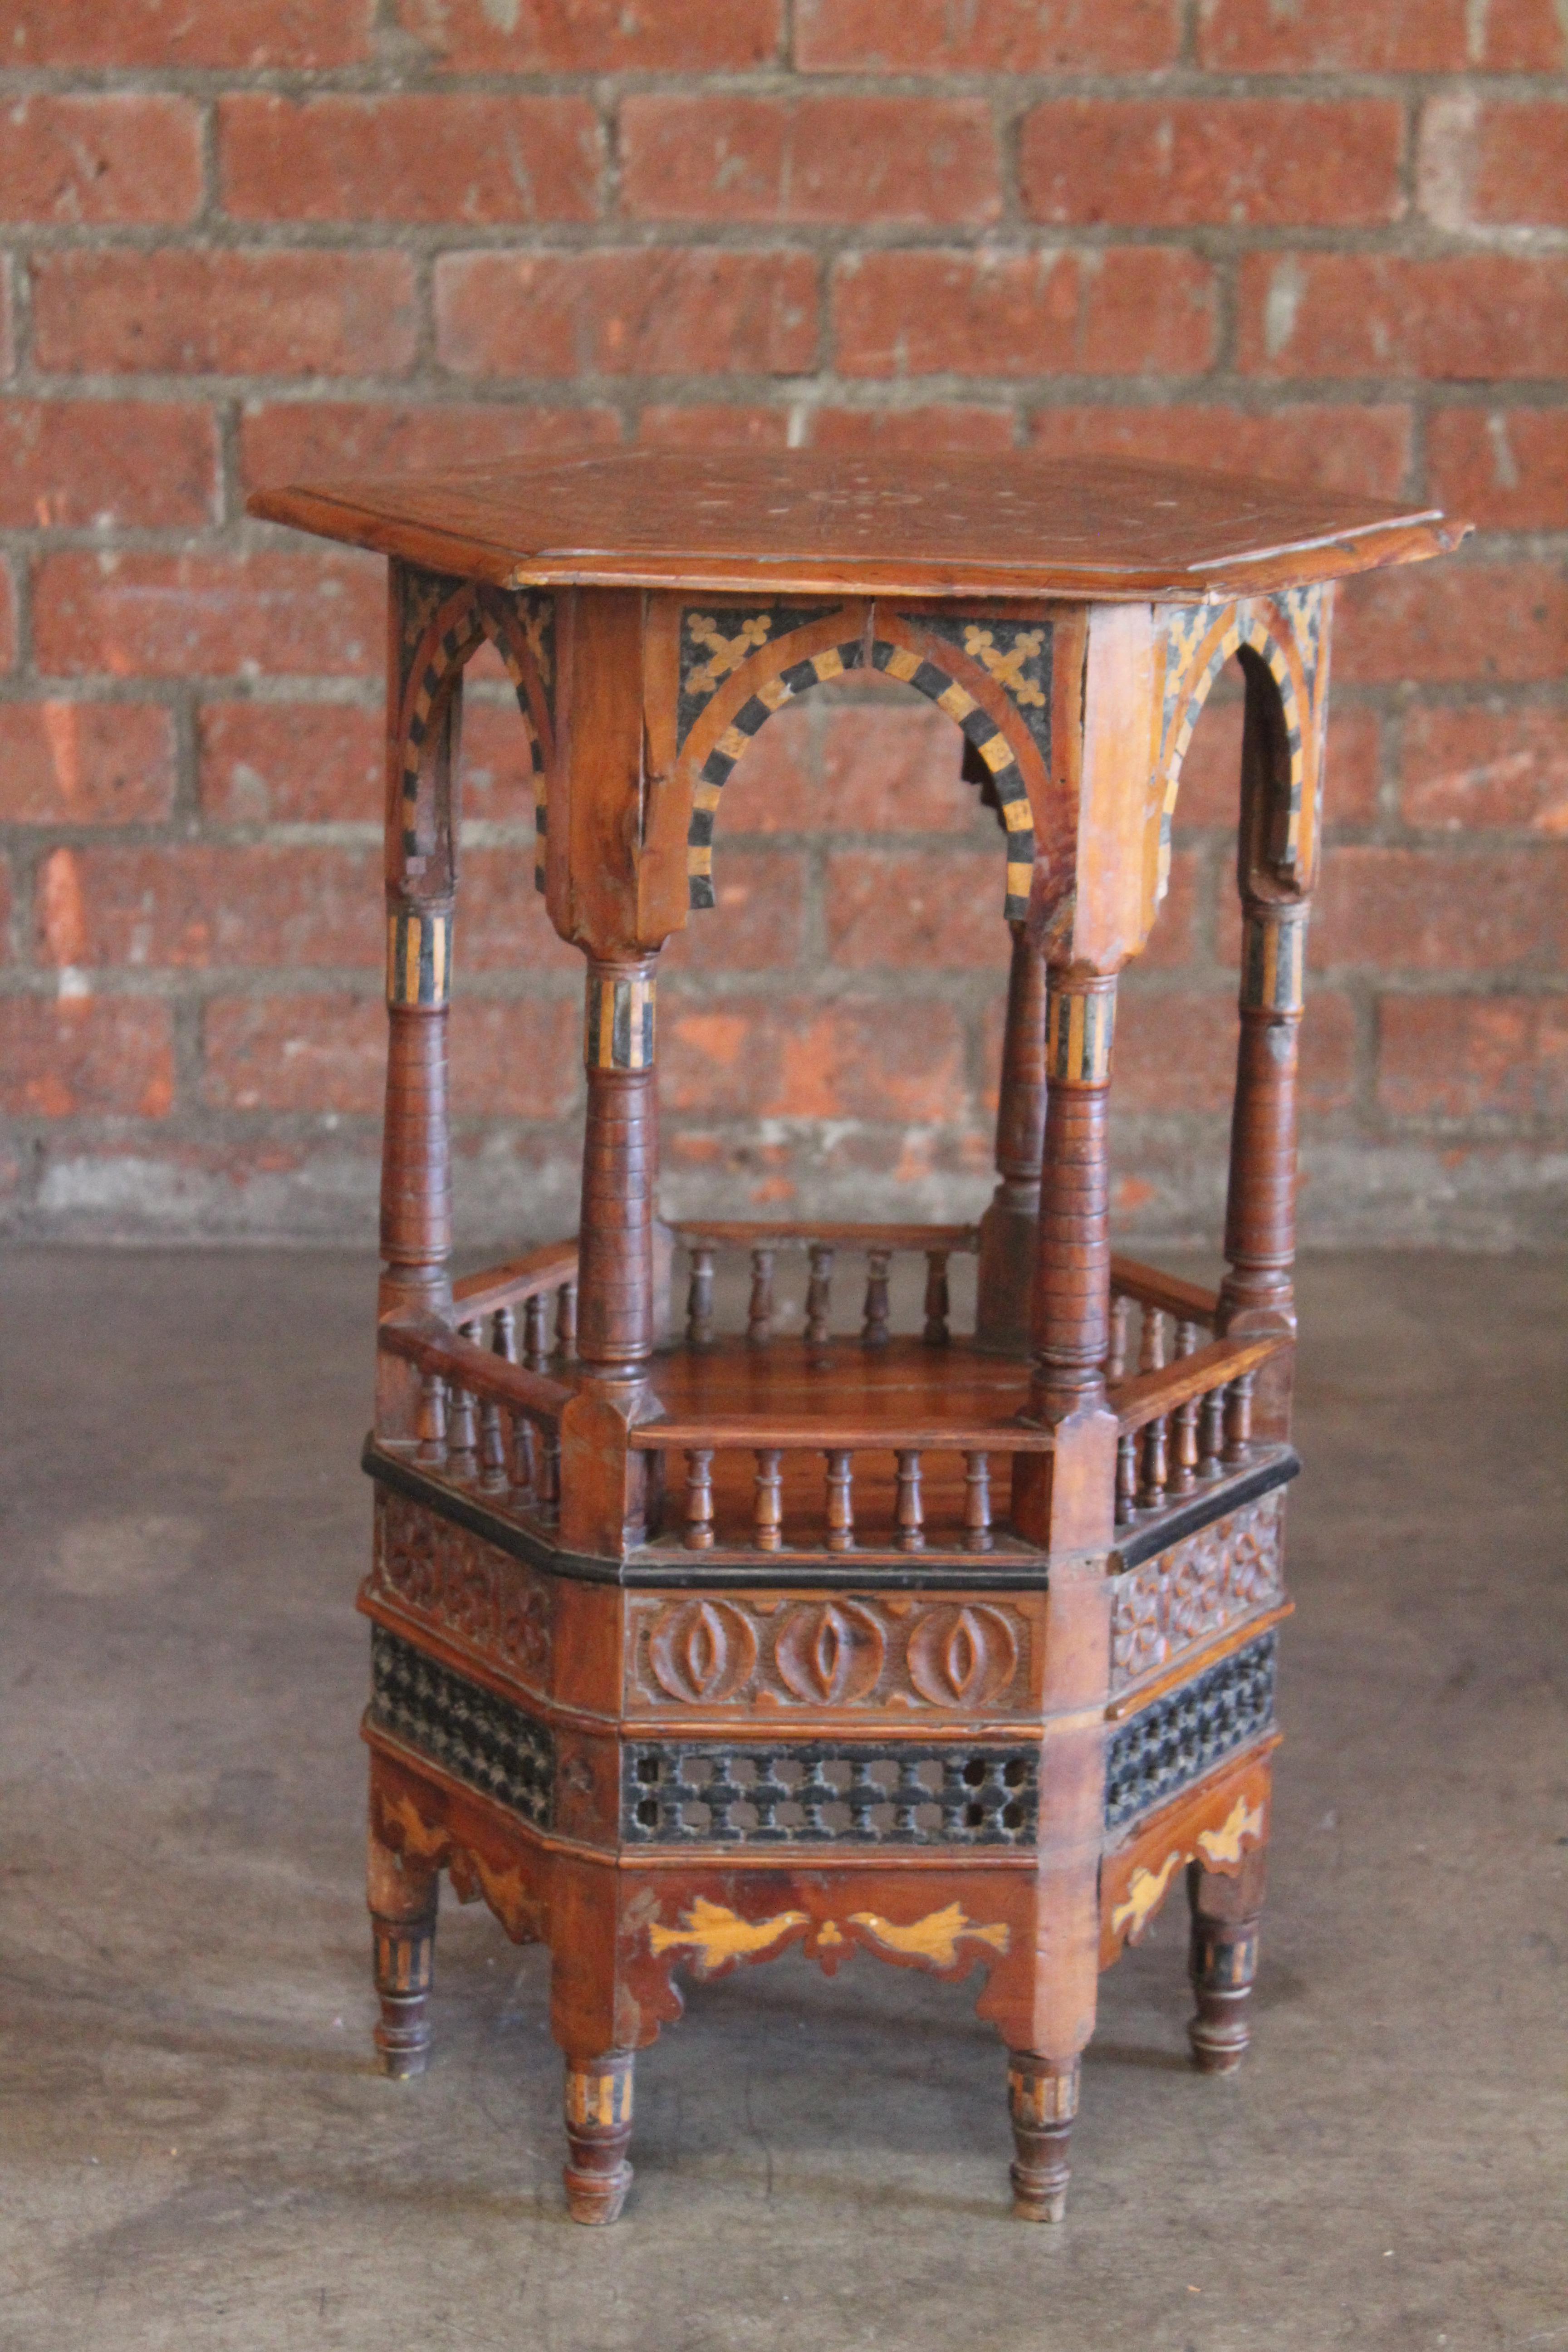 A beautiful antique Moorish or Syrian side table with intricate carved details and mother of pearl and bone inlay with ebony. Absolutely stunning piece with age and character. In overall wonderful condition considering age.